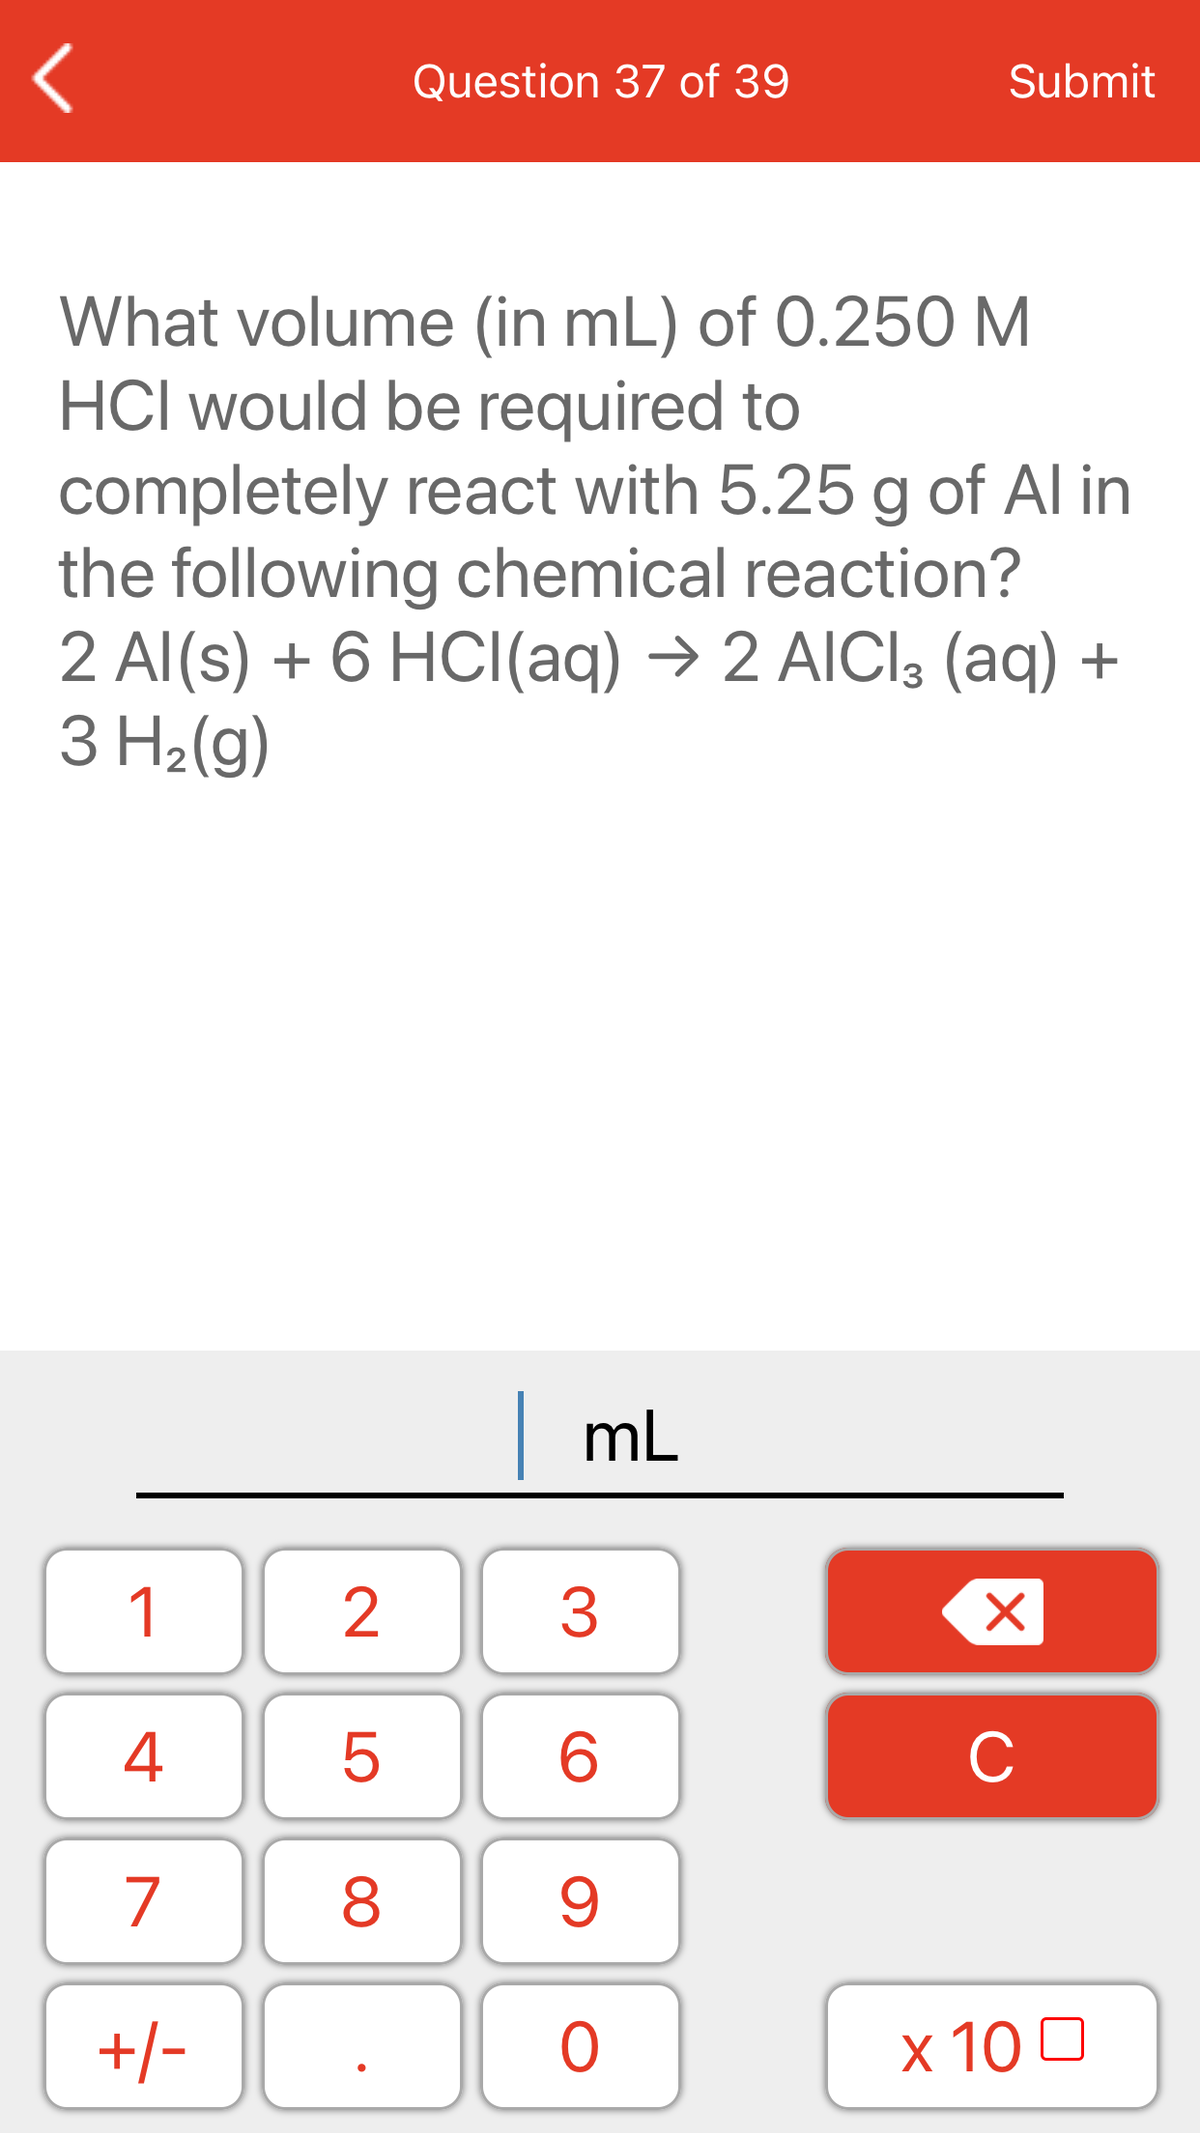 Question 37 of 39
Submit
What volume (in mL) of 0.250 M
HCl would be required to
completely react with 5.25 g of Al in
the following chemical reaction?
2 Al(s) + 6 HCI(aq) → 2 AICI3 (aq) +
3 H2(g)
mL
1
4
C
7
+/-
x 10 0
LO
00
